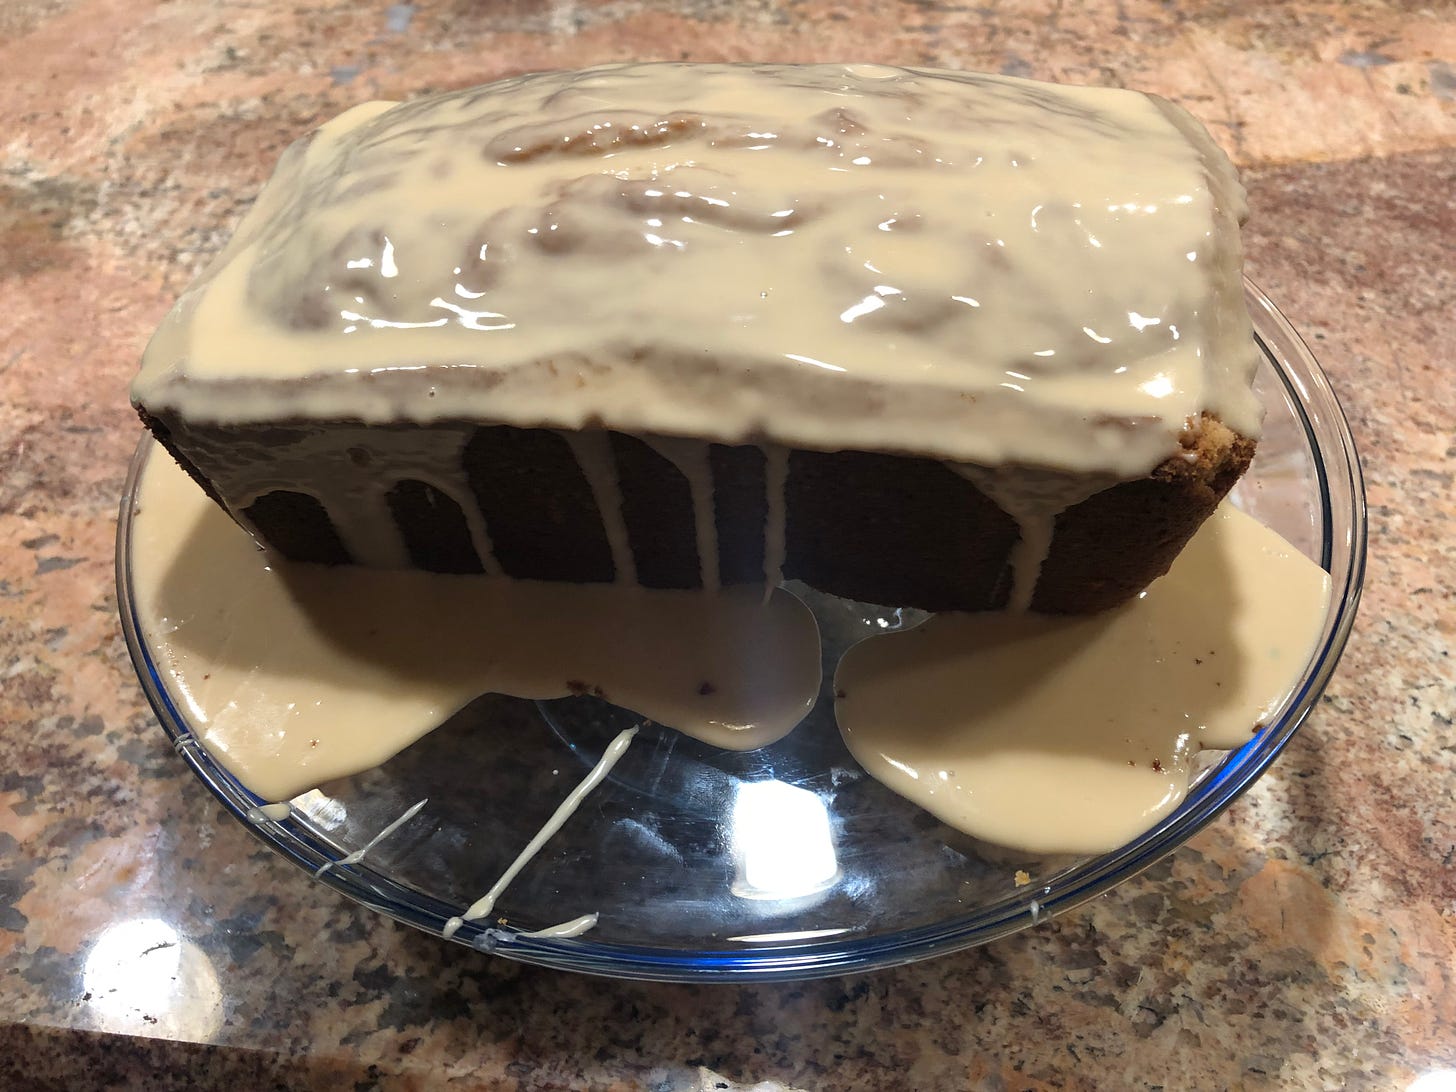 A loaf of pound cake with a caramel colored drizzle of icing.